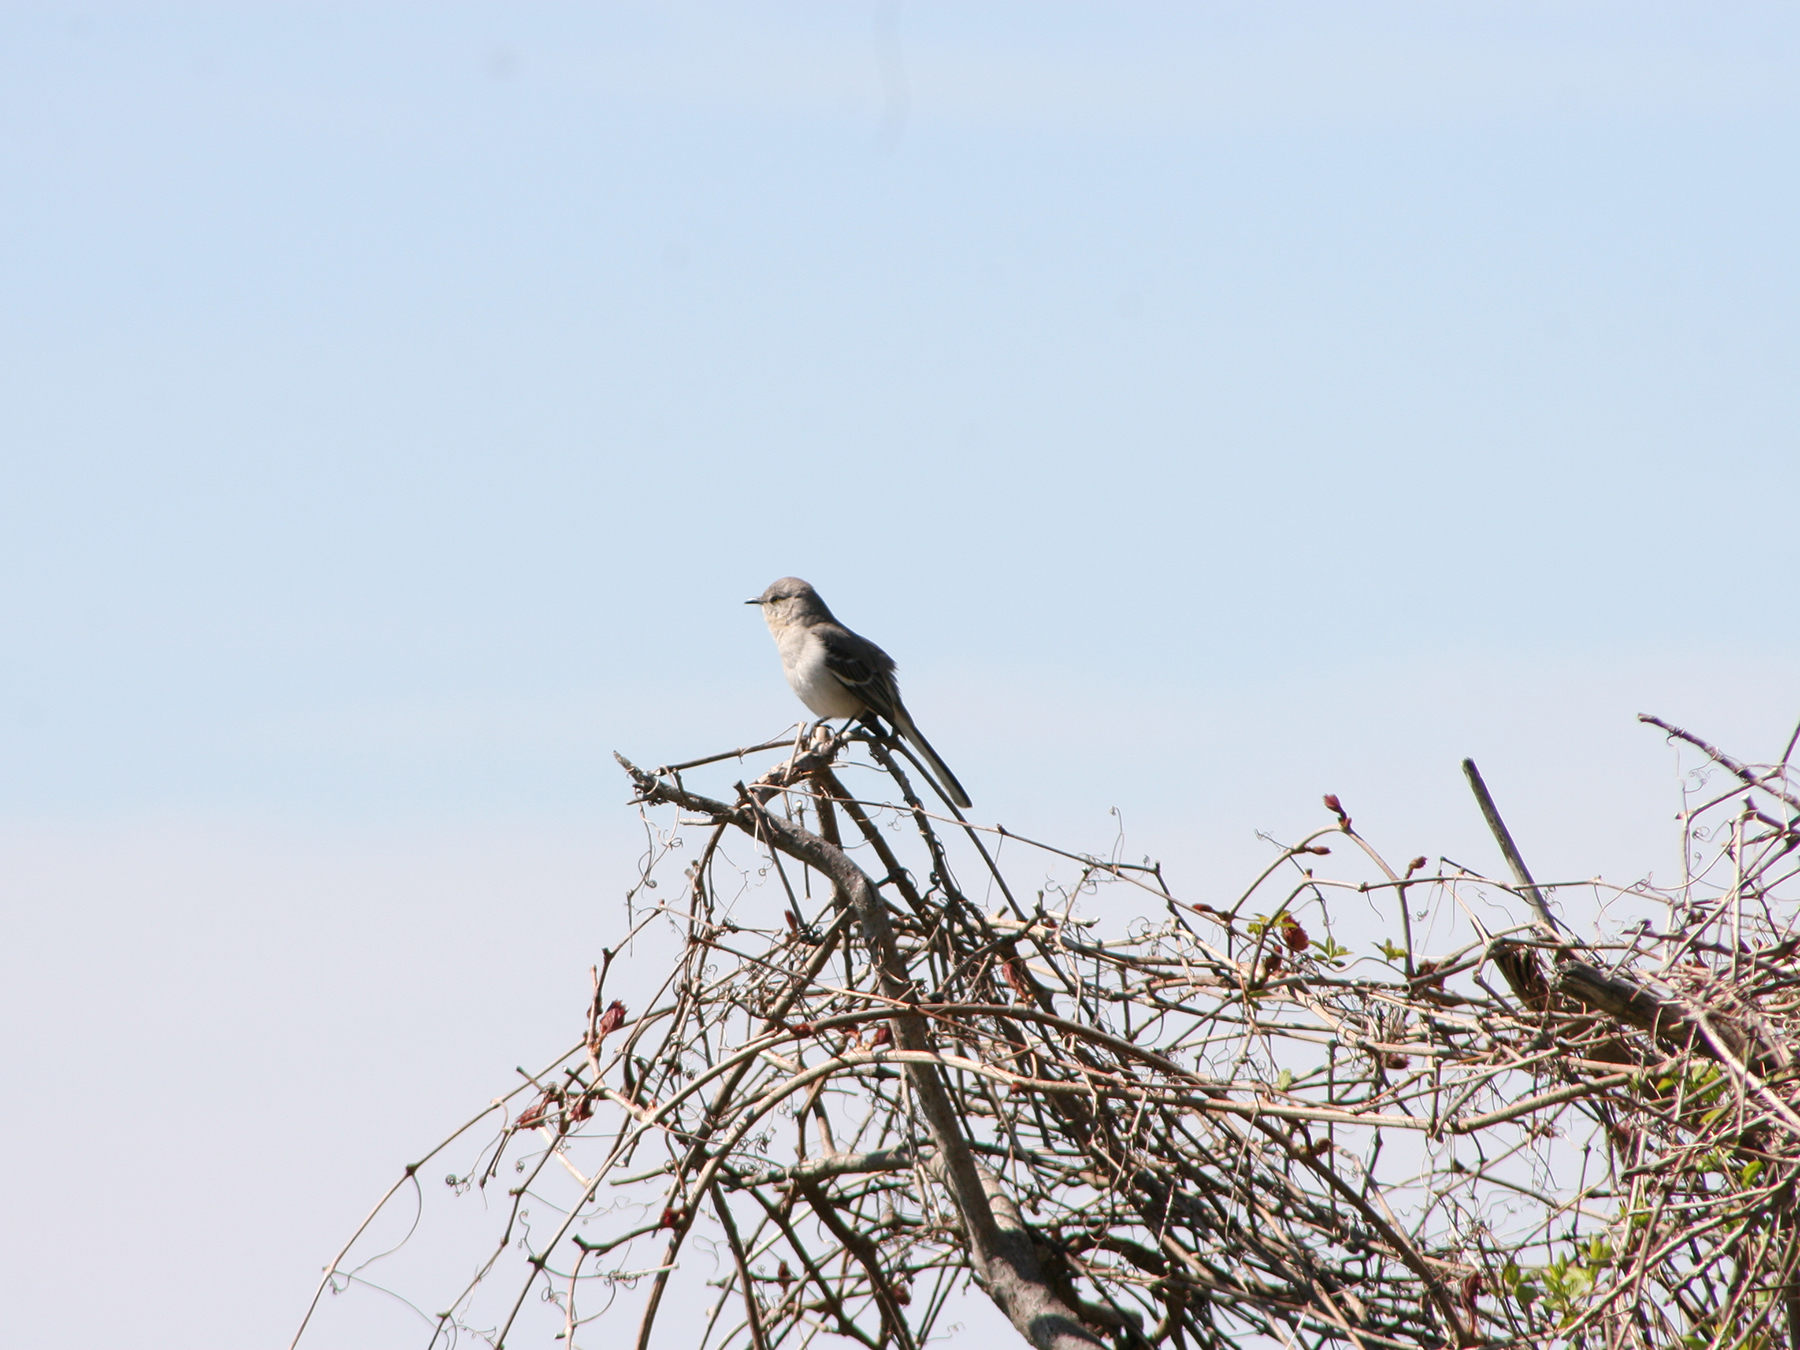 A mockingbird perched on a pile of branches